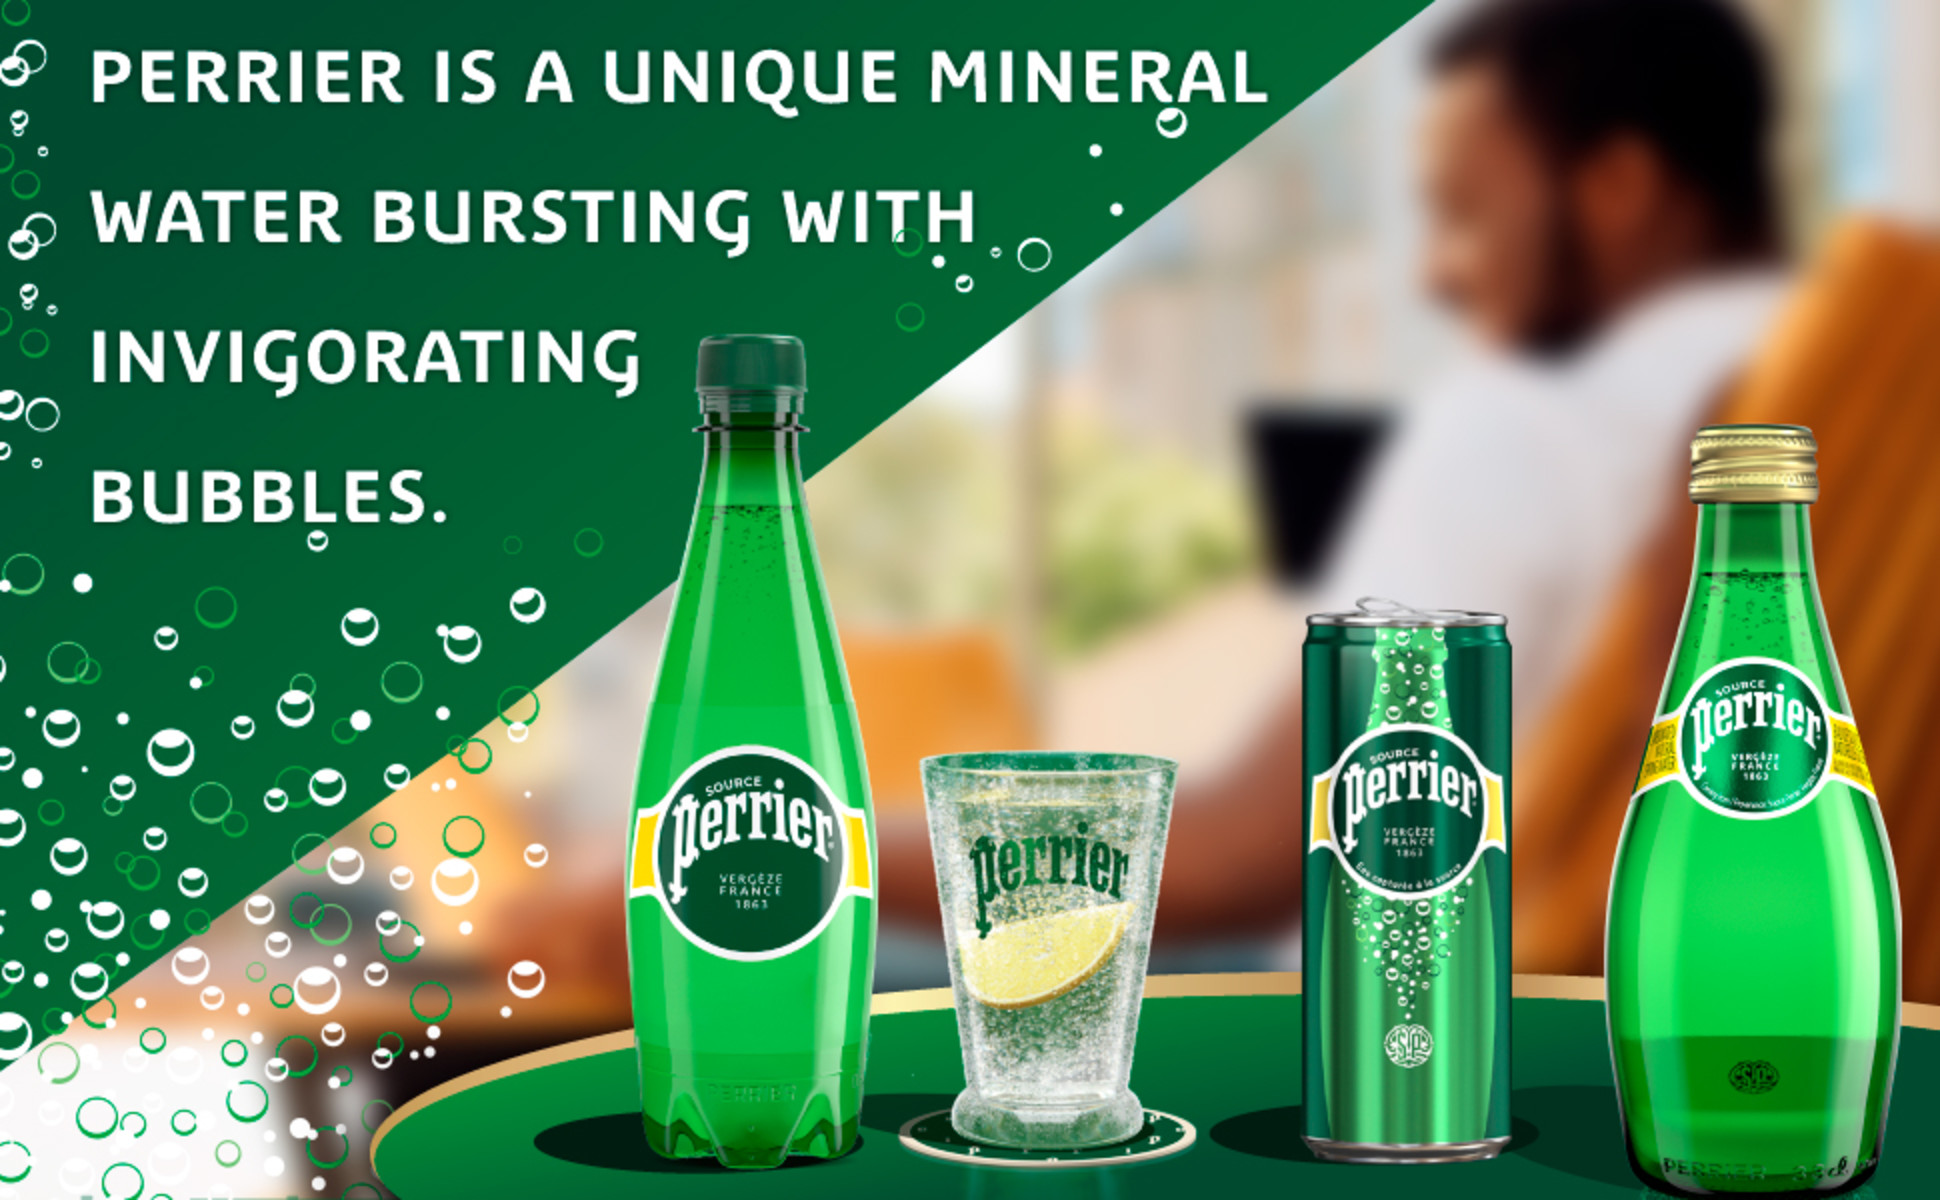 Perrier sparkling mineral water is bursting with invigorating bubbles